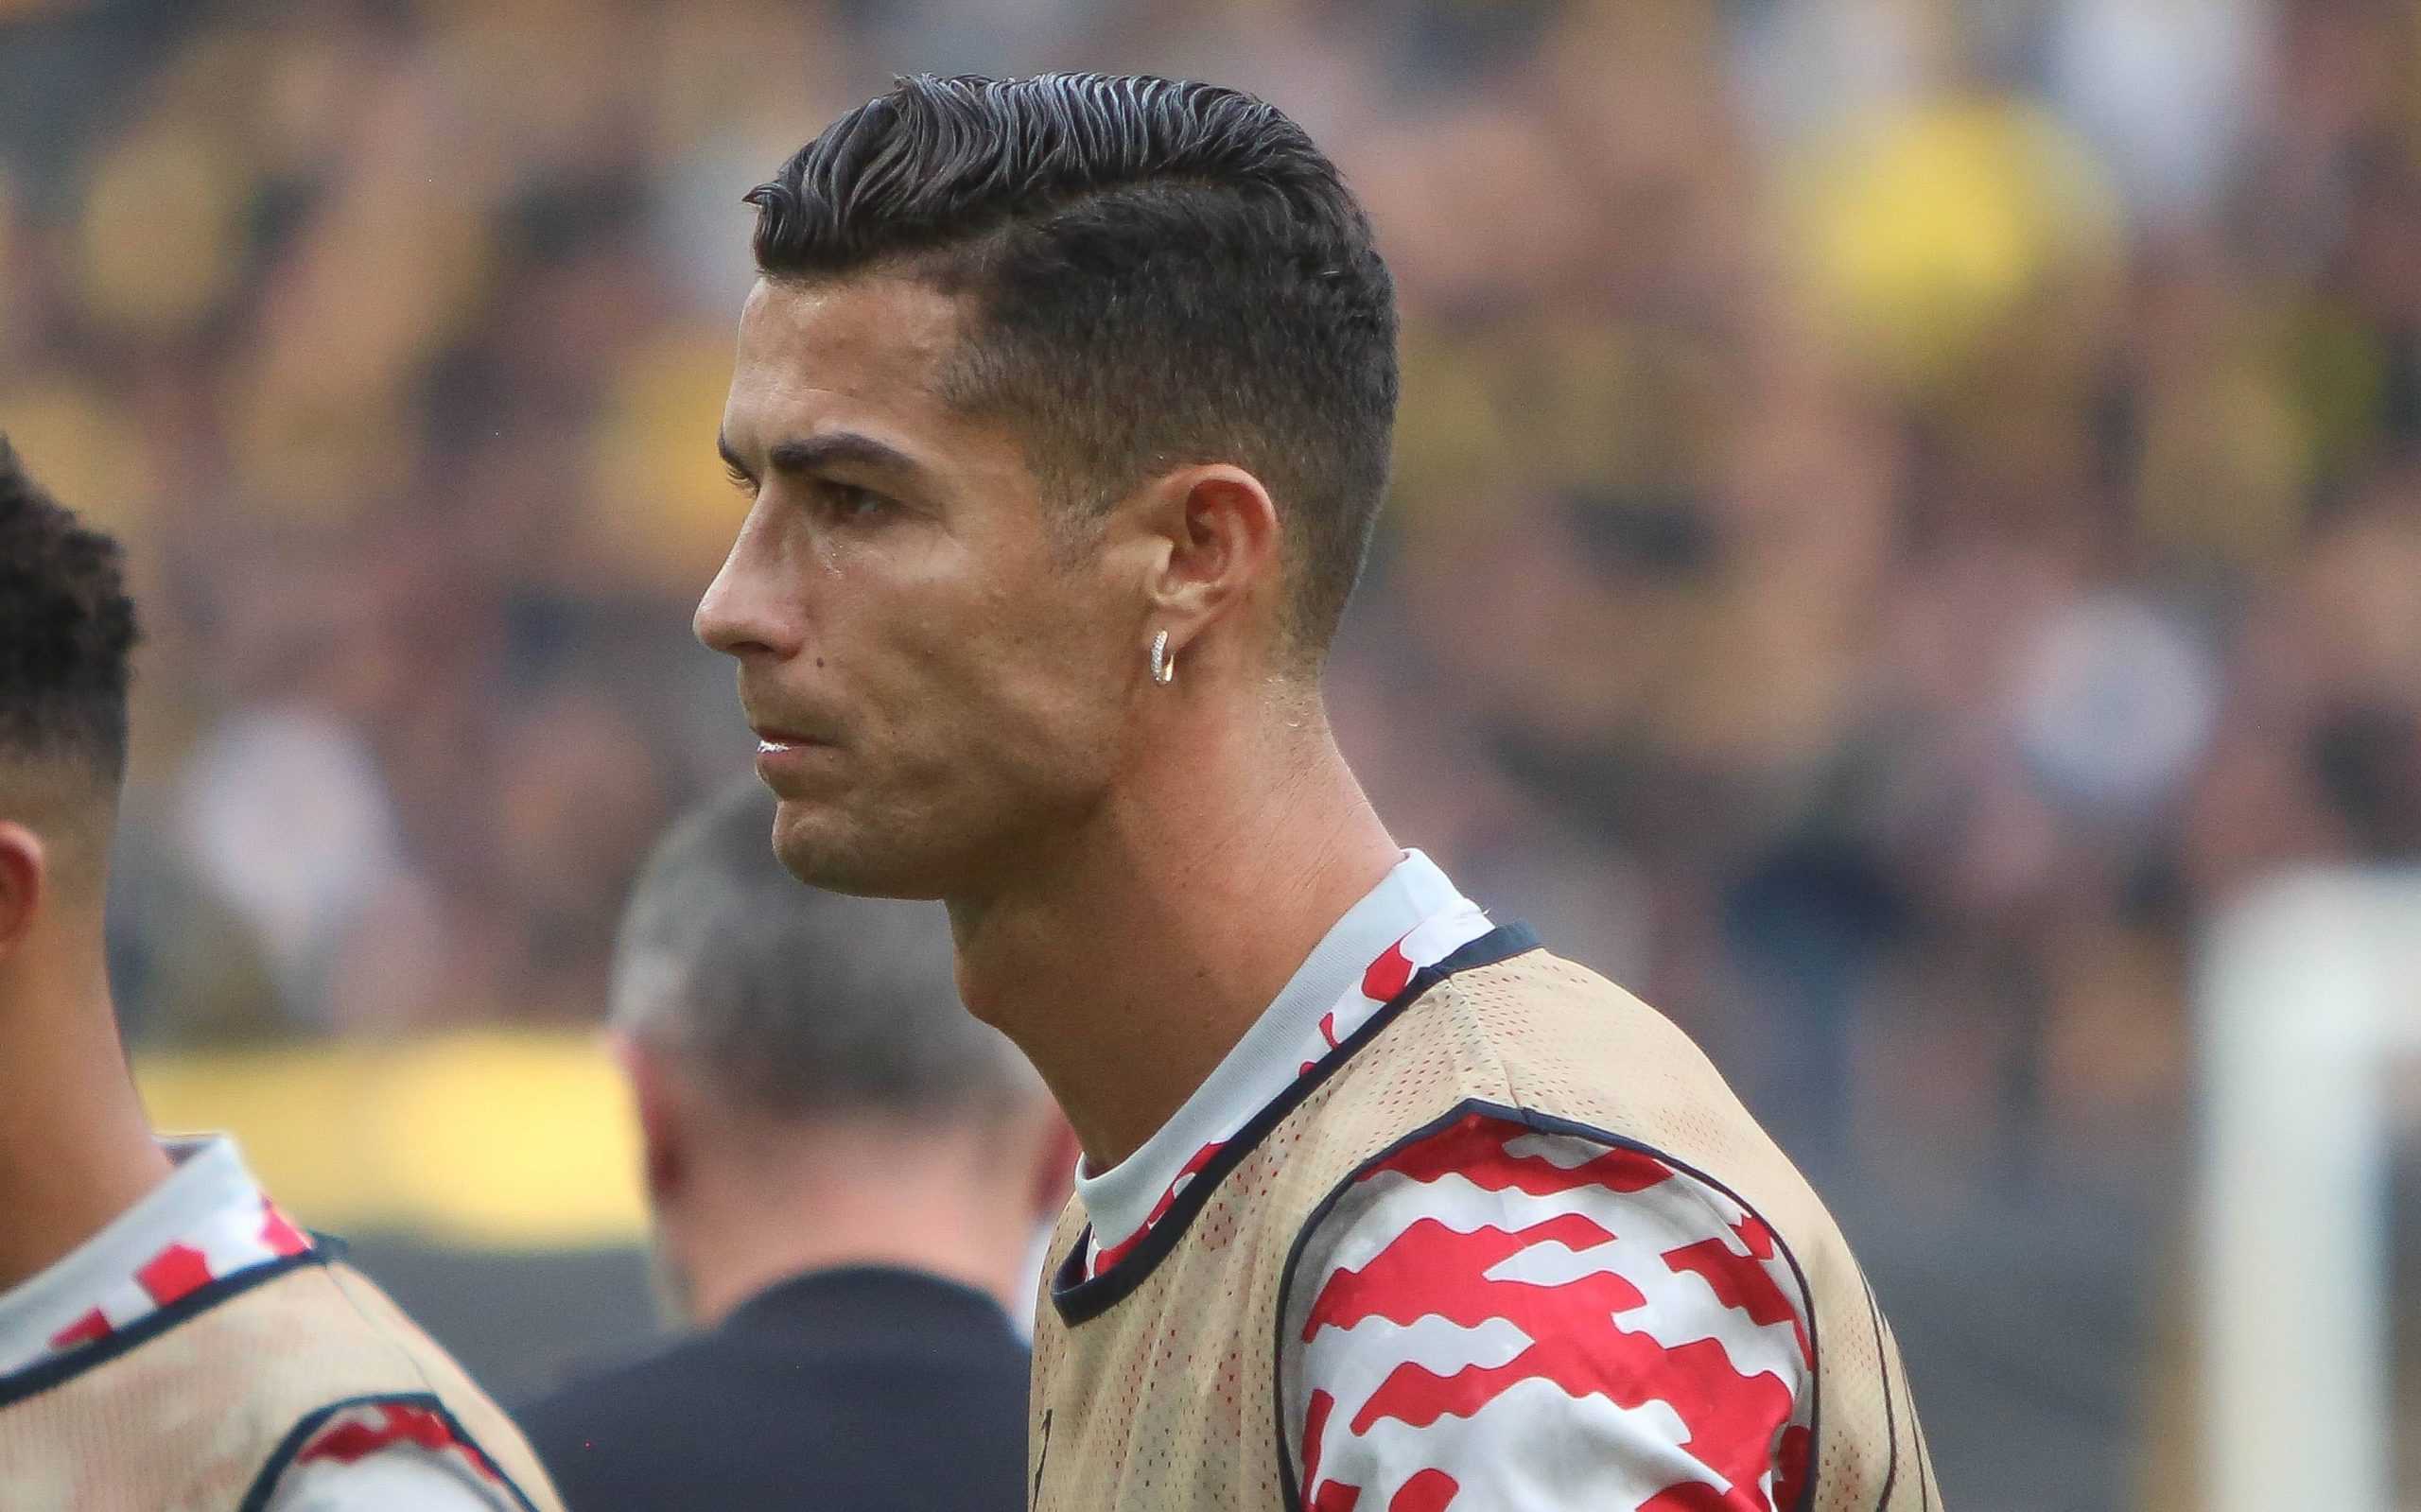 Cristiano Ronaldo of Manchester United before the UEFA Champions League tie against Young Boys.